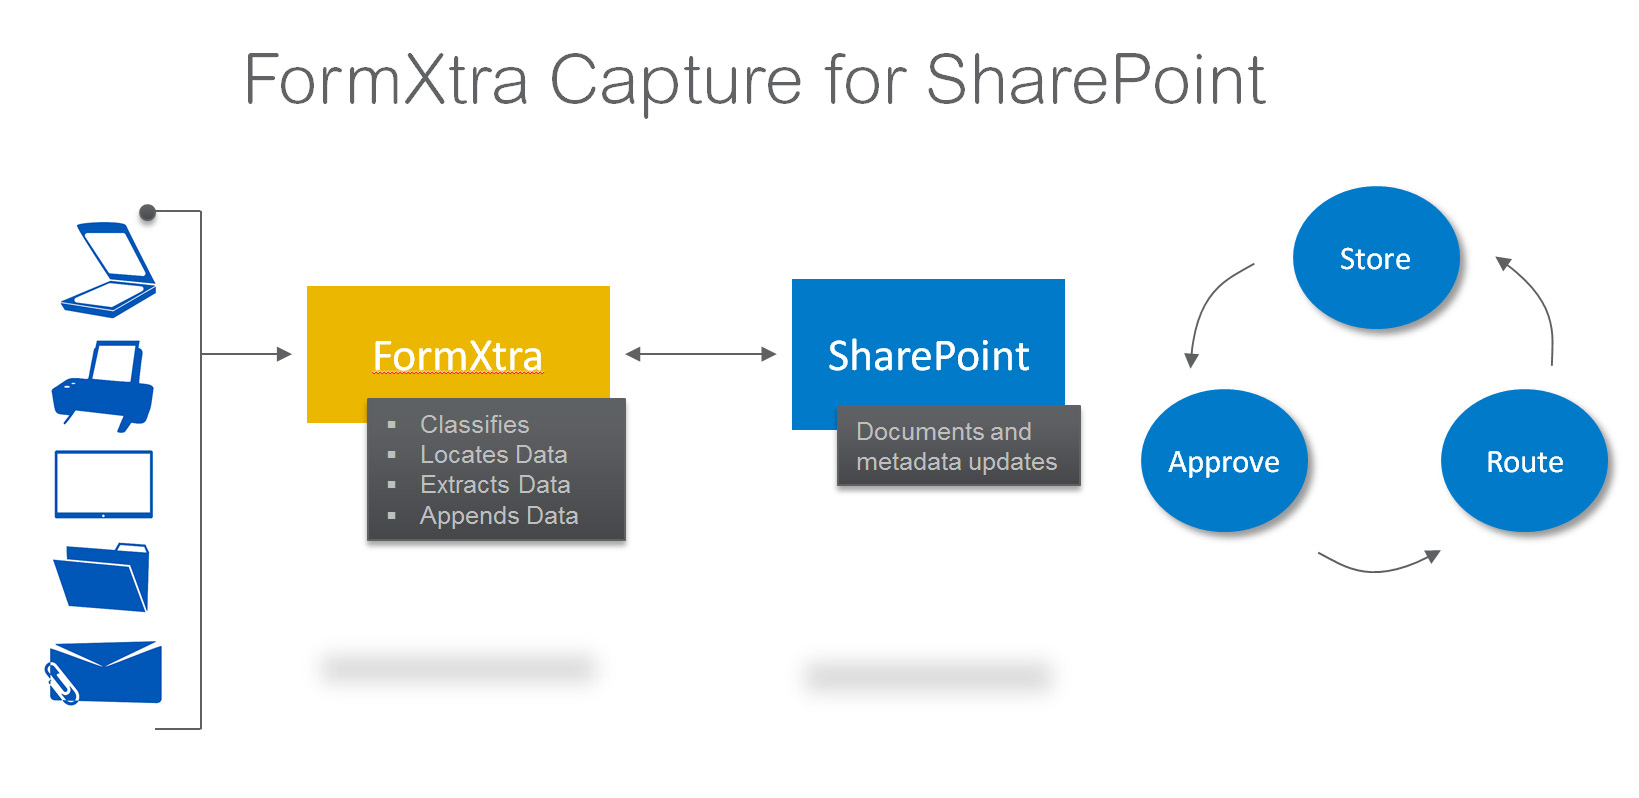 FormXtra_Capture_for_SharePoint